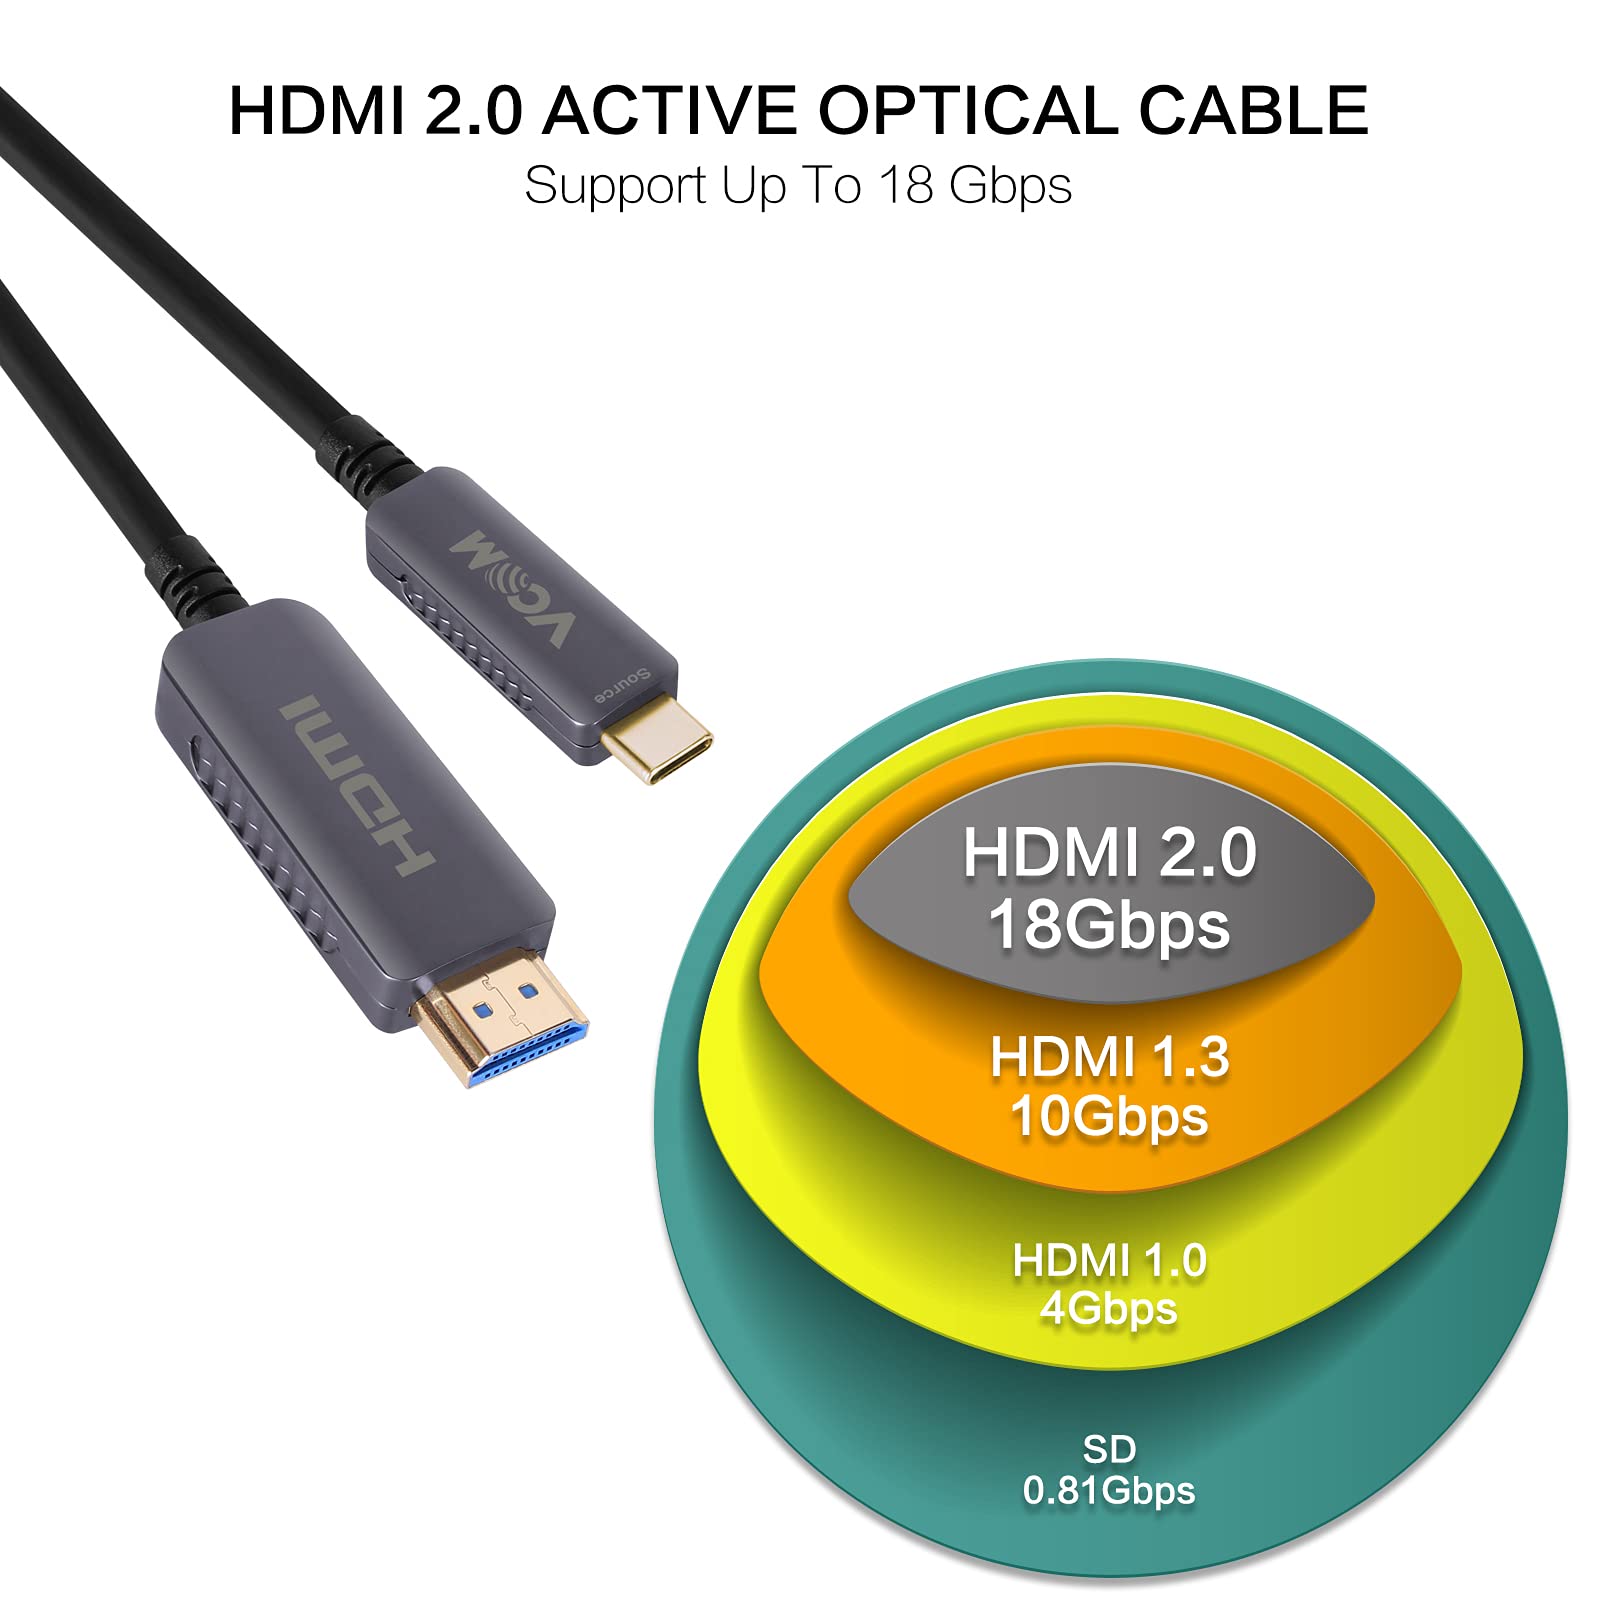 VCOM USB-C to HDMI Fiber Optic Cable, Support 18Gbps, 4K@60Hz, HDCP 2.2, HDR, Thunderbolt 3/4, Type C 3.1 to HDMI 2.0 Cord Compatible with MacBook Pro/Air, Surface Go, Tablets, Laptops, Switch (33ft)